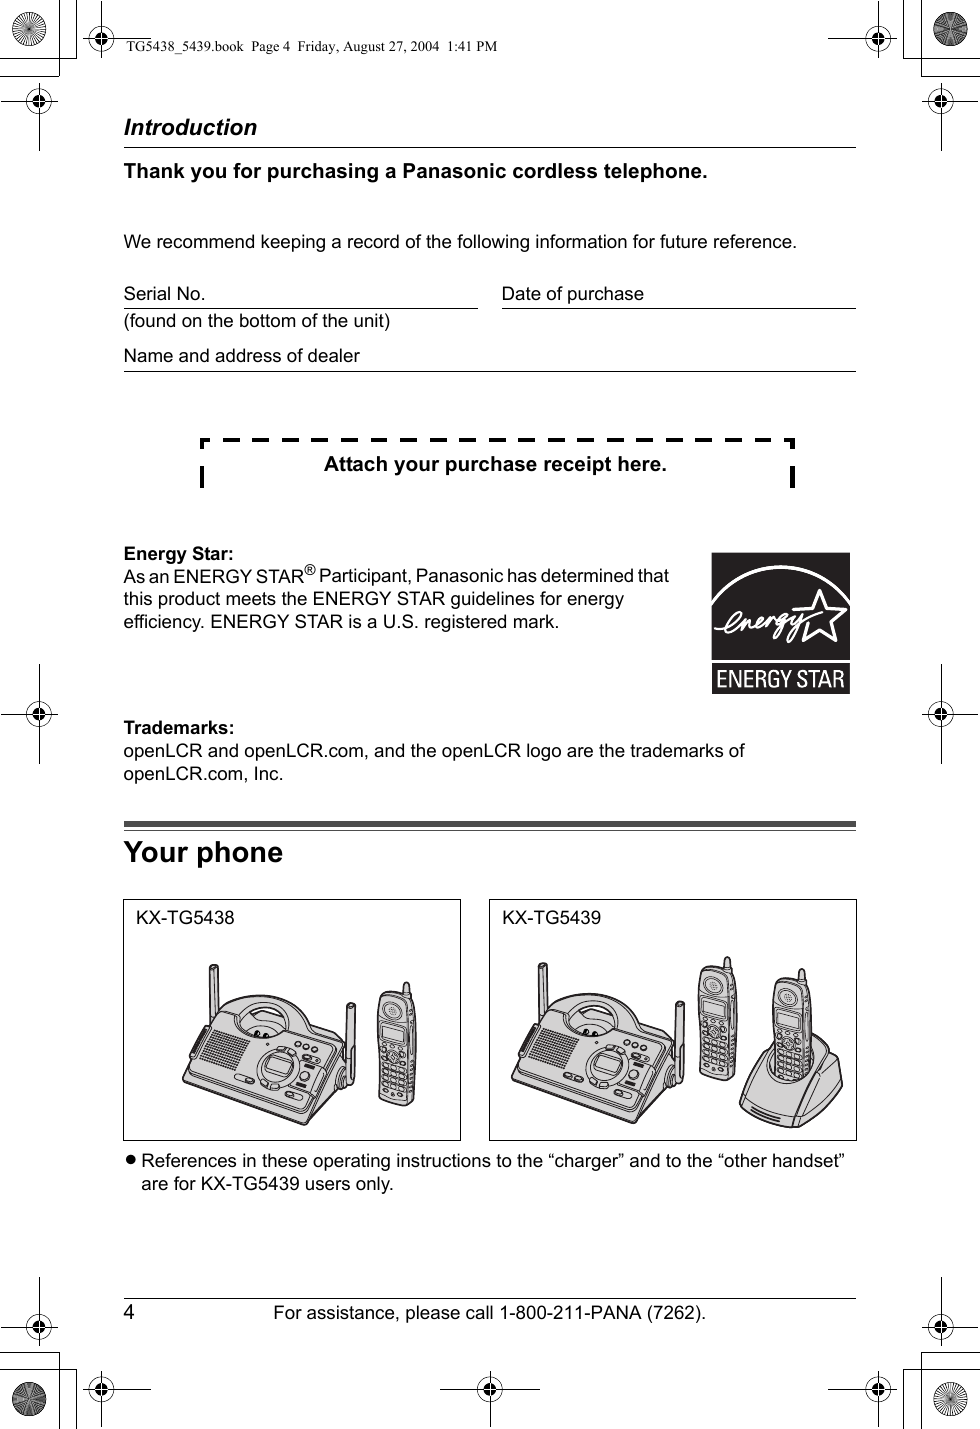 Introduction4For assistance, please call 1-800-211-PANA (7262).Thank you for purchasing a Panasonic cordless telephone.We recommend keeping a record of the following information for future reference.Attach your purchase receipt here.Trademarks:openLCR and openLCR.com, and the openLCR logo are the trademarks of openLCR.com, Inc.Your phoneLReferences in these operating instructions to the “charger” and to the “other handset” are for KX-TG5439 users only.Serial No. Date of purchase(found on the bottom of the unit)Name and address of dealerEnergy Star:As an ENERGY STAR® Participant, Panasonic has determined that this product meets the ENERGY STAR guidelines for energy efficiency. ENERGY STAR is a U.S. registered mark.KX-TG5438 KX-TG5439TG5438_5439.book  Page 4  Friday, August 27, 2004  1:41 PM